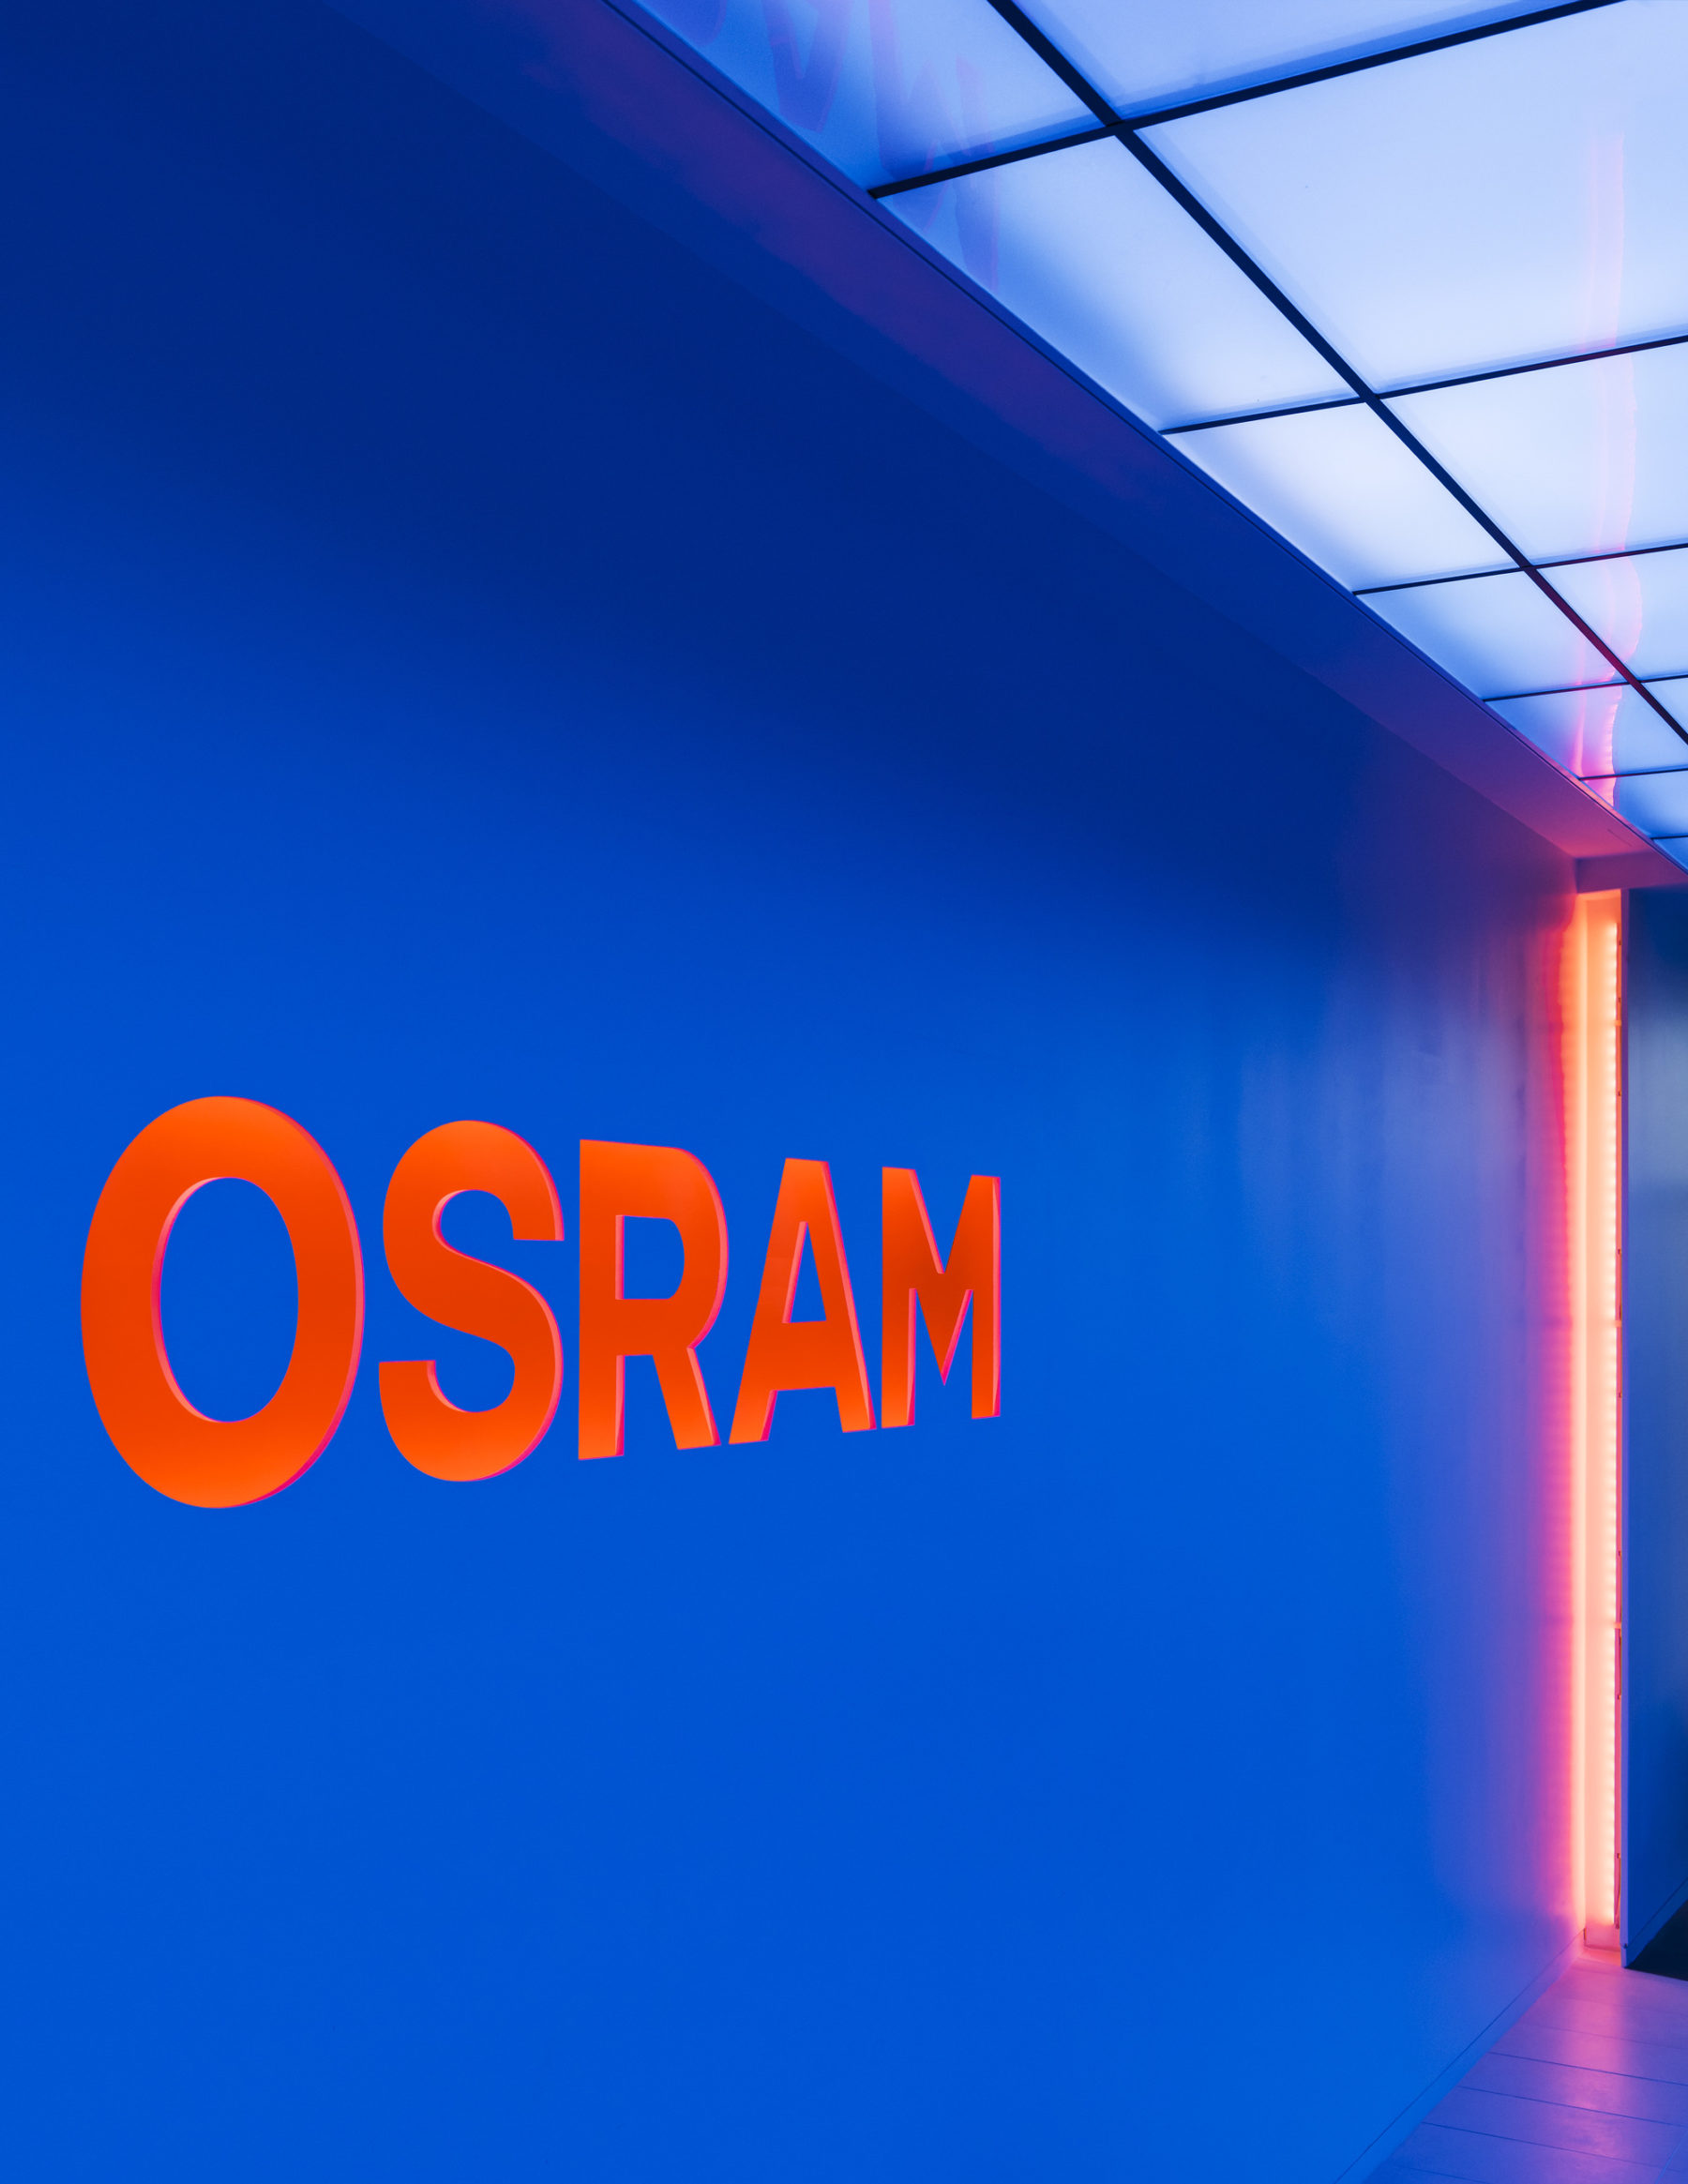 wall with osram name painted on it